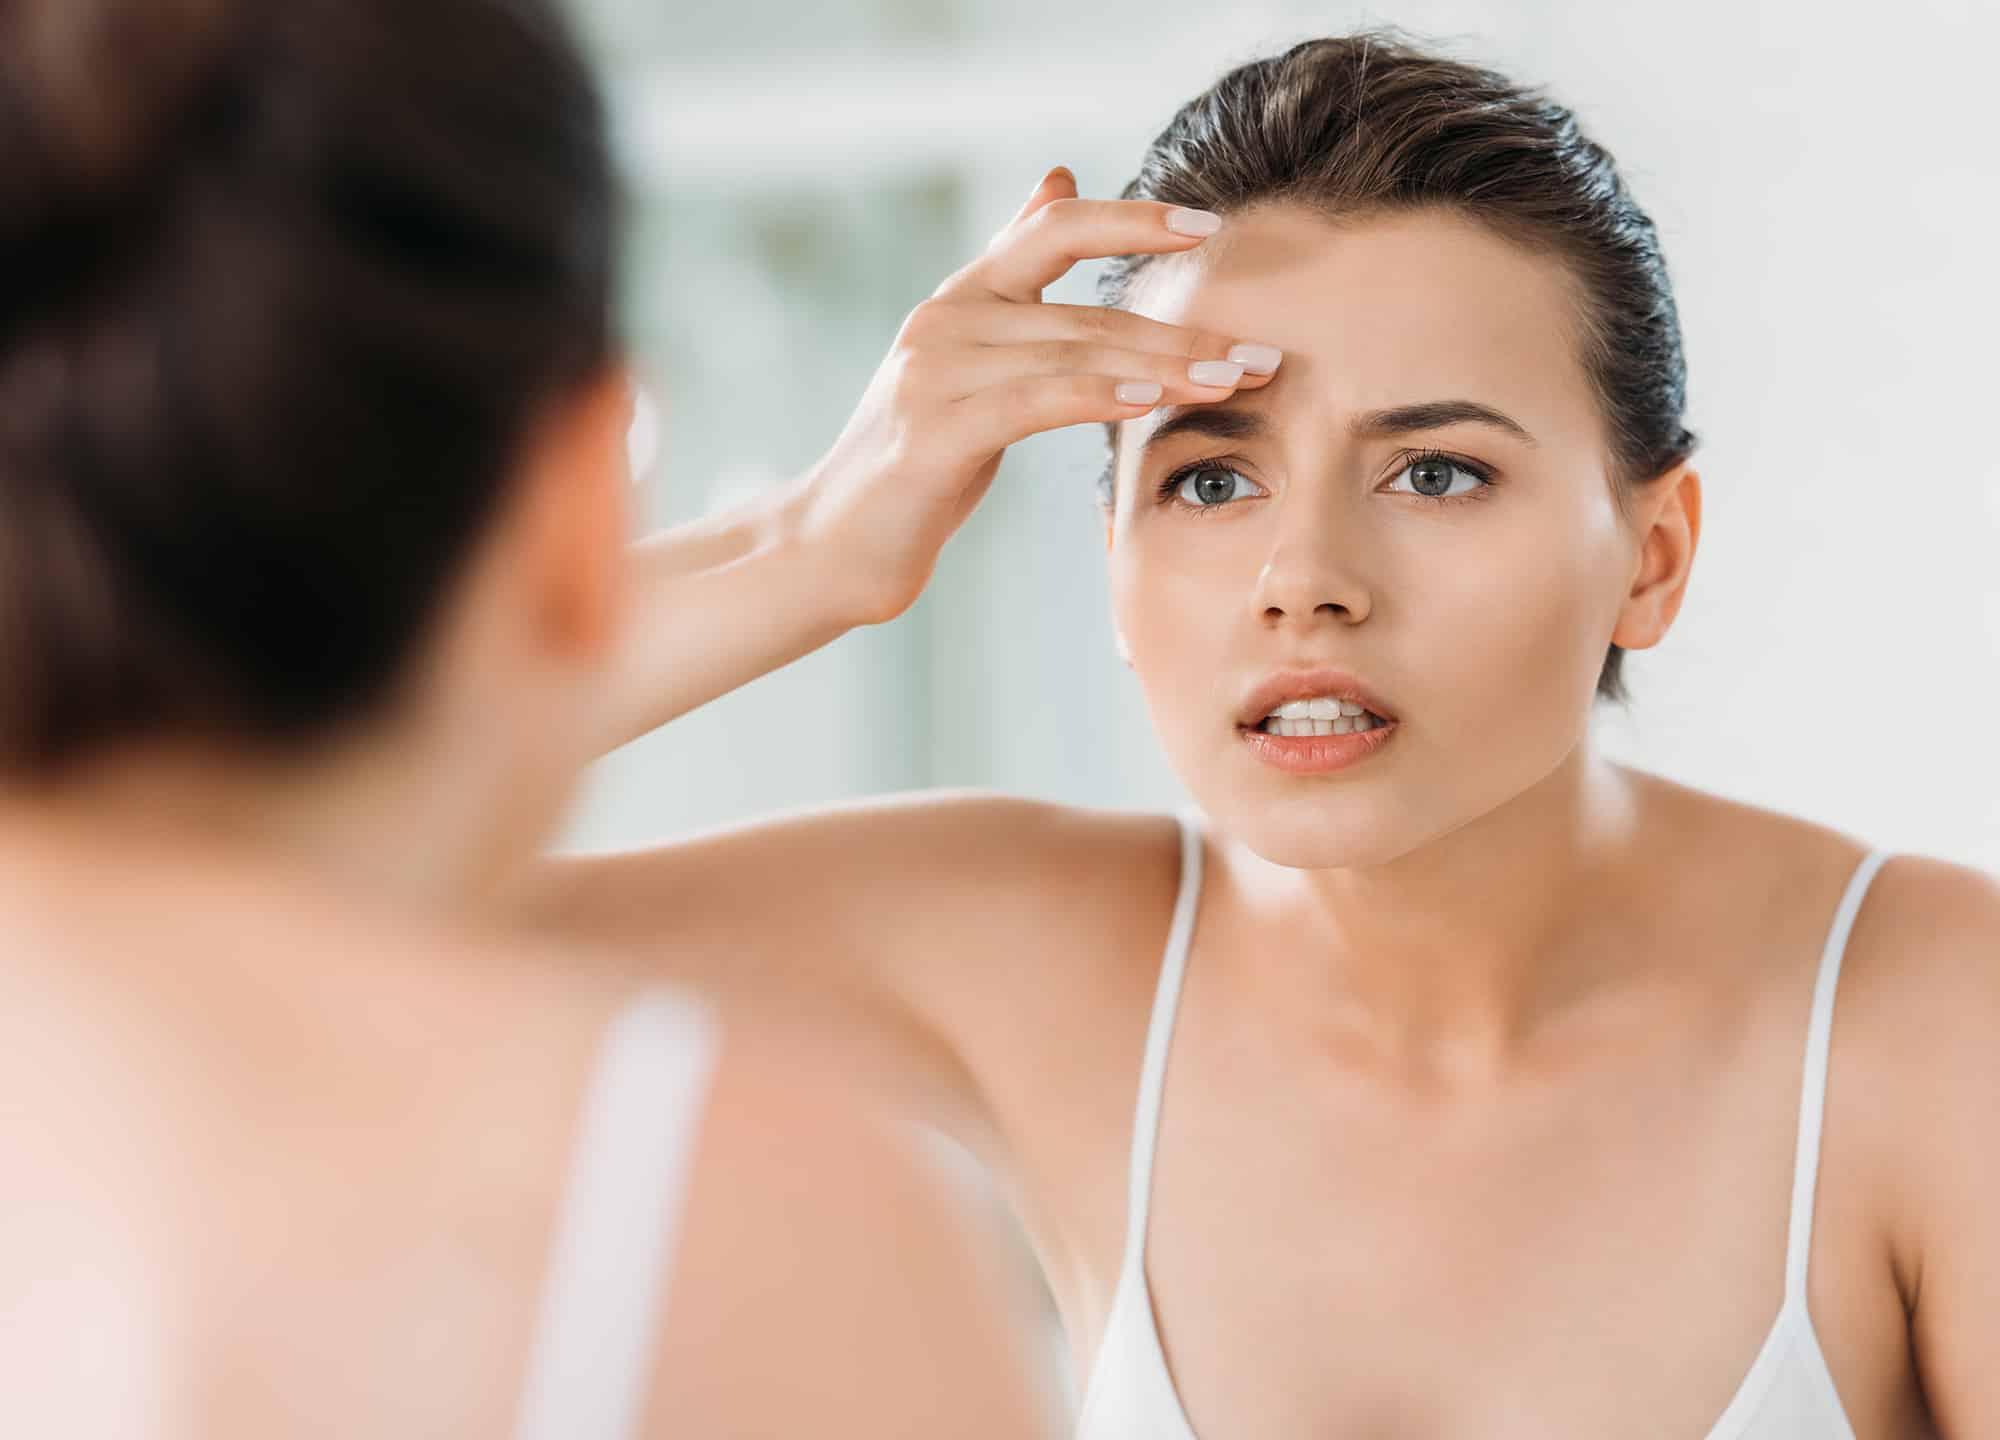 Botox can lift a drooping brow, but it has its limitations. Here's how to know when it's time to move on from Botox, and opt for a brow lift.